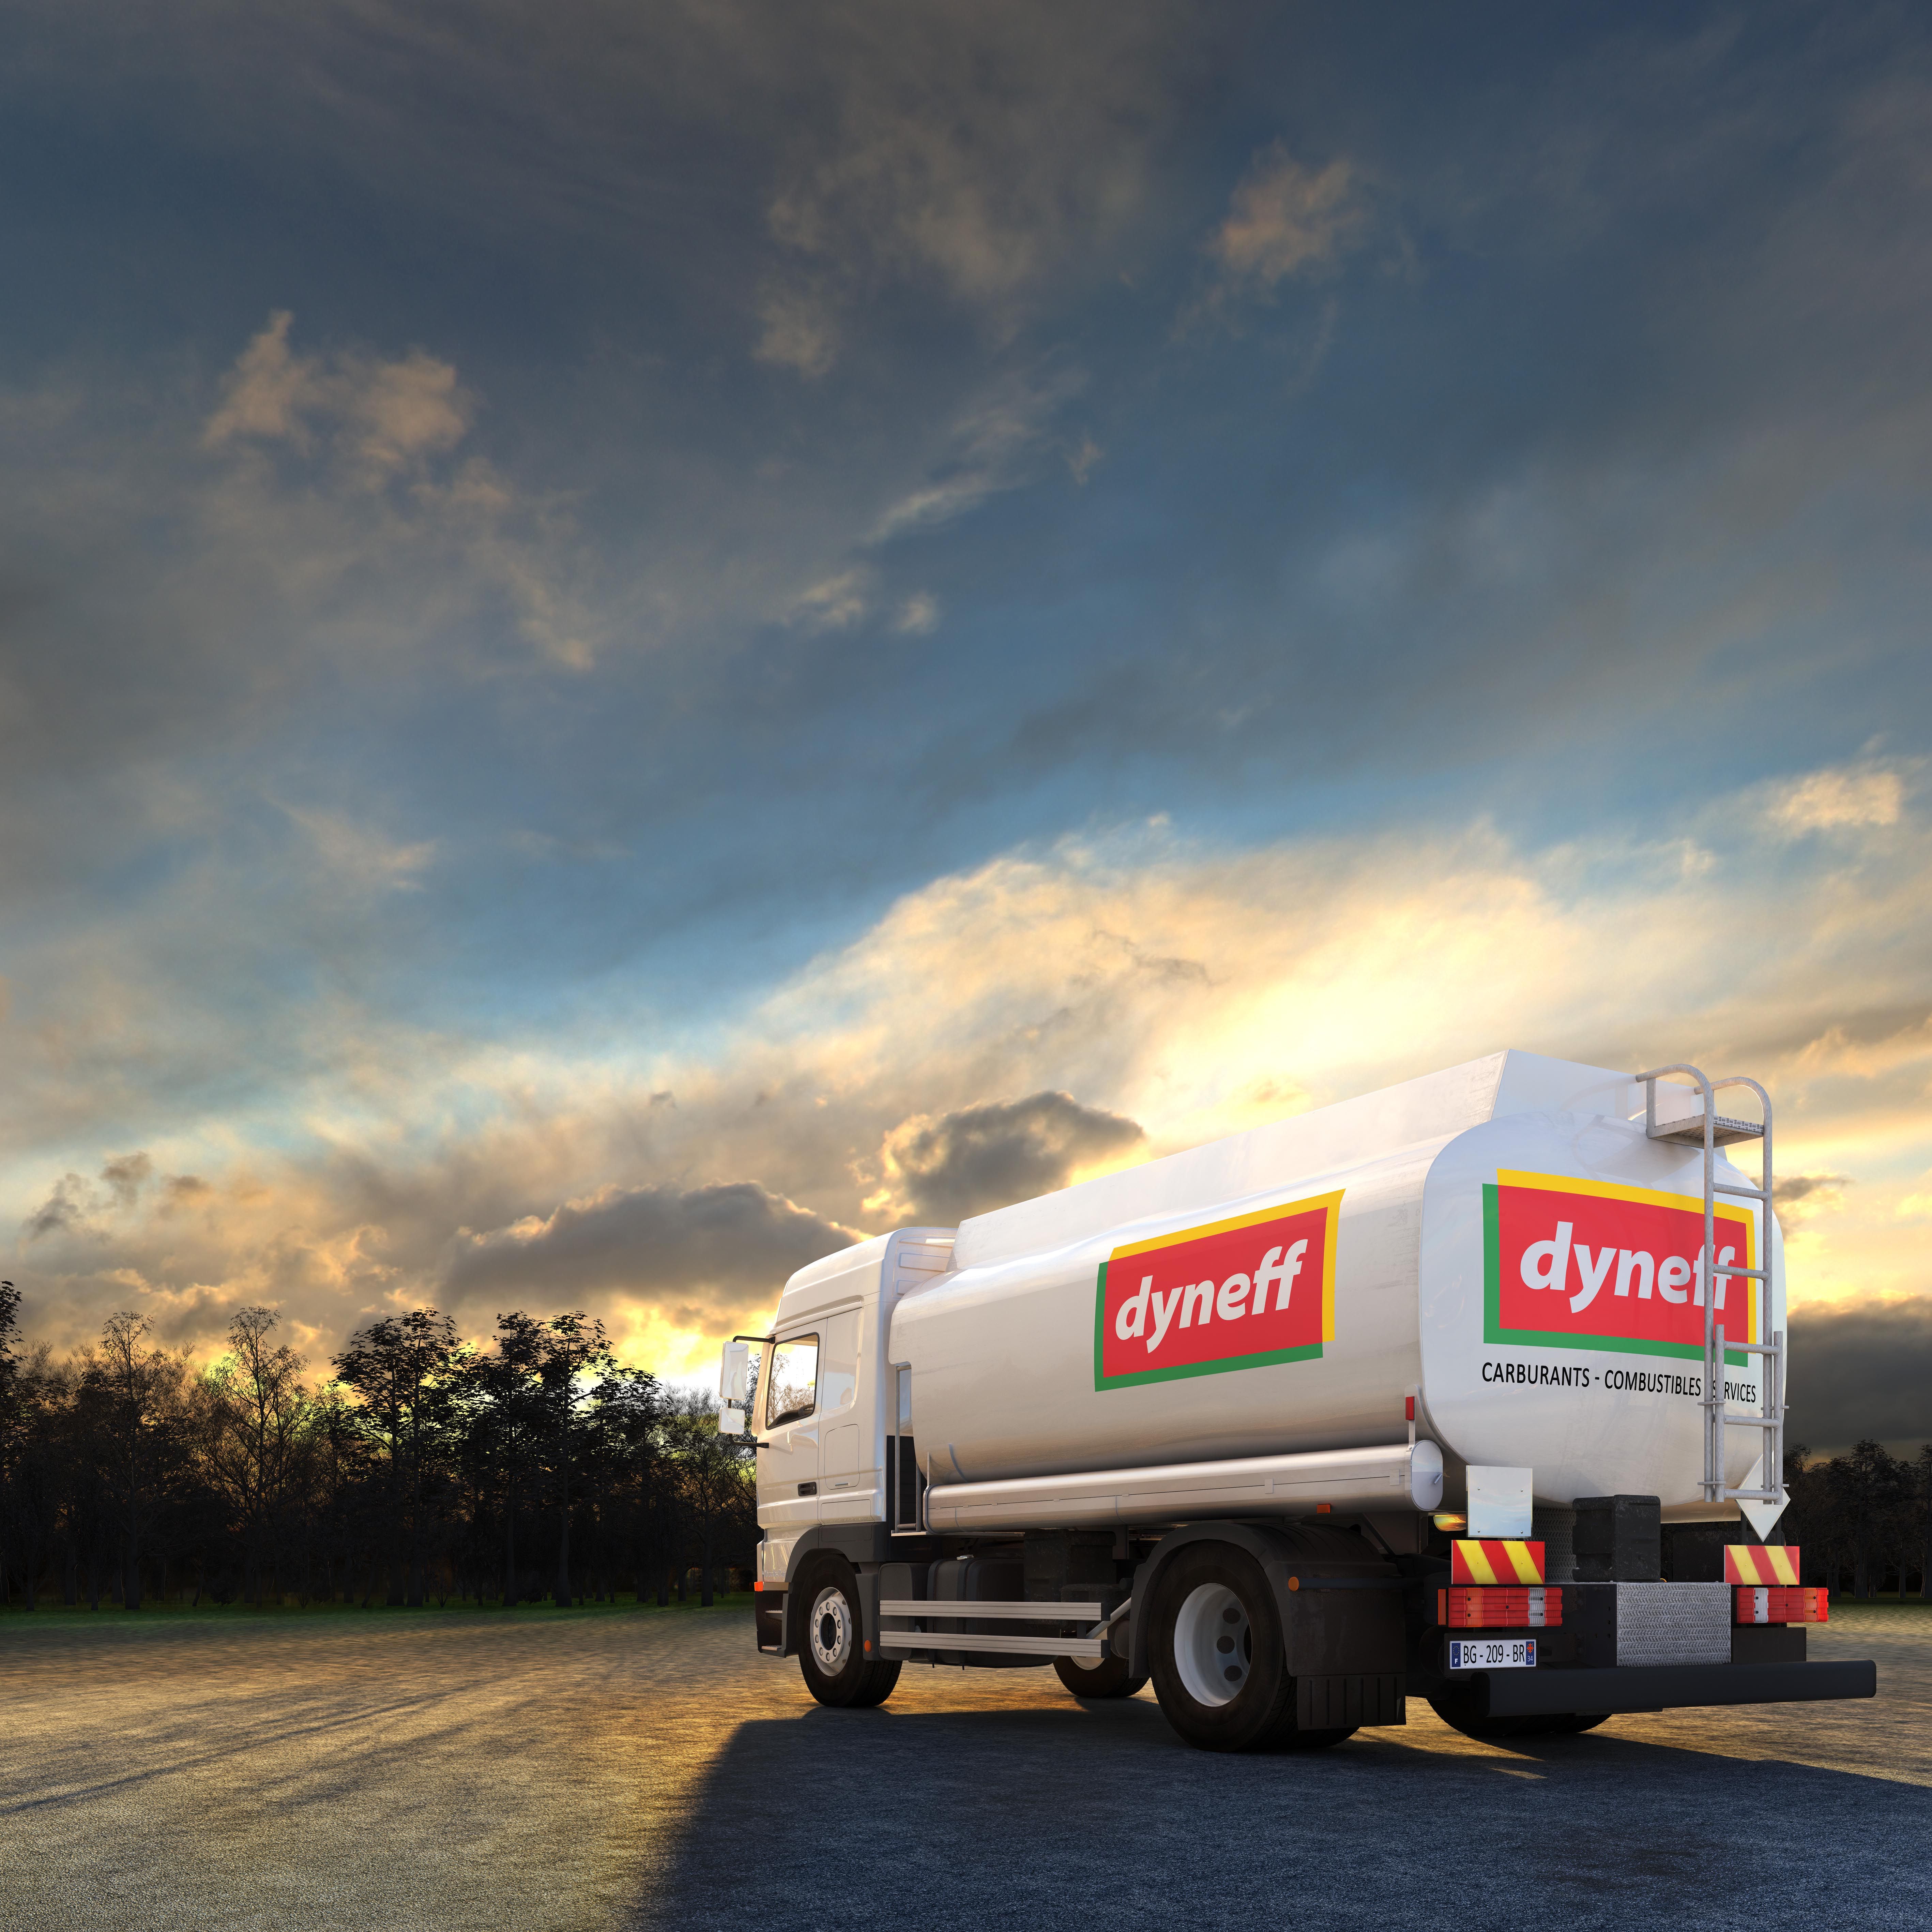 dyneff_camion